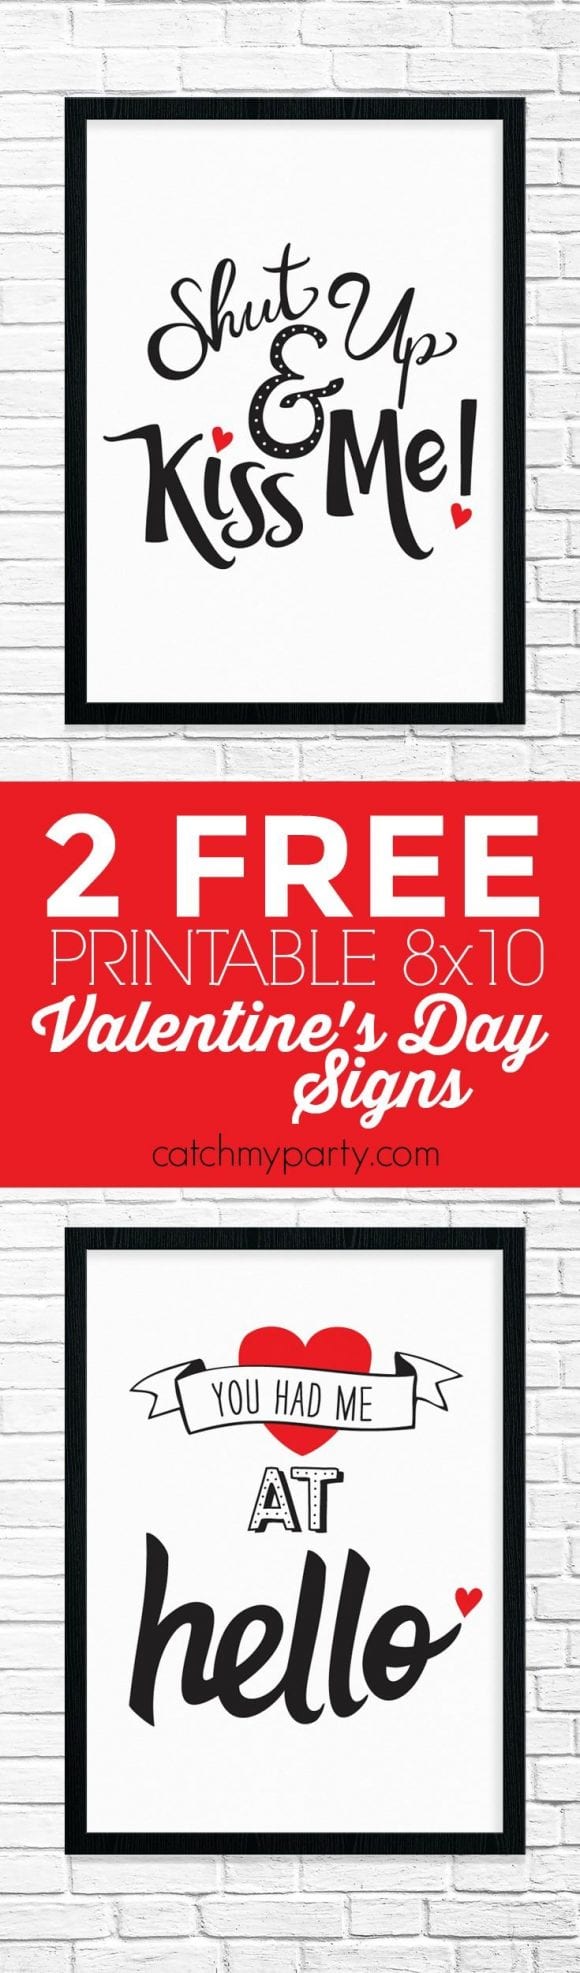 Free Printable Romantic Valentine's Day Signs | CatchMyParty.com